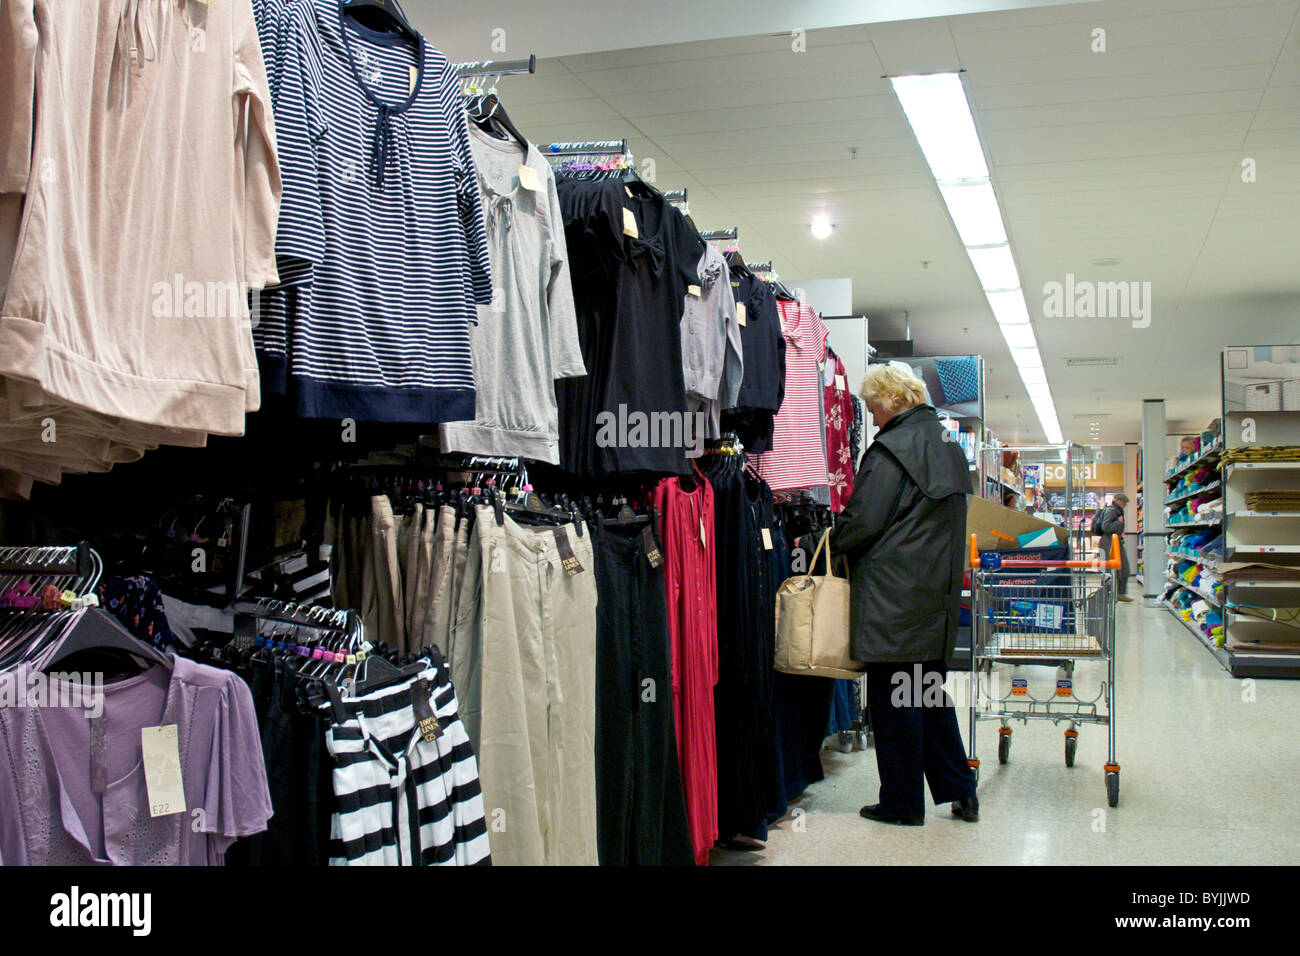 Interior of large store showing the wide range of merchandise available. This section sells women's clothes Stock Photo